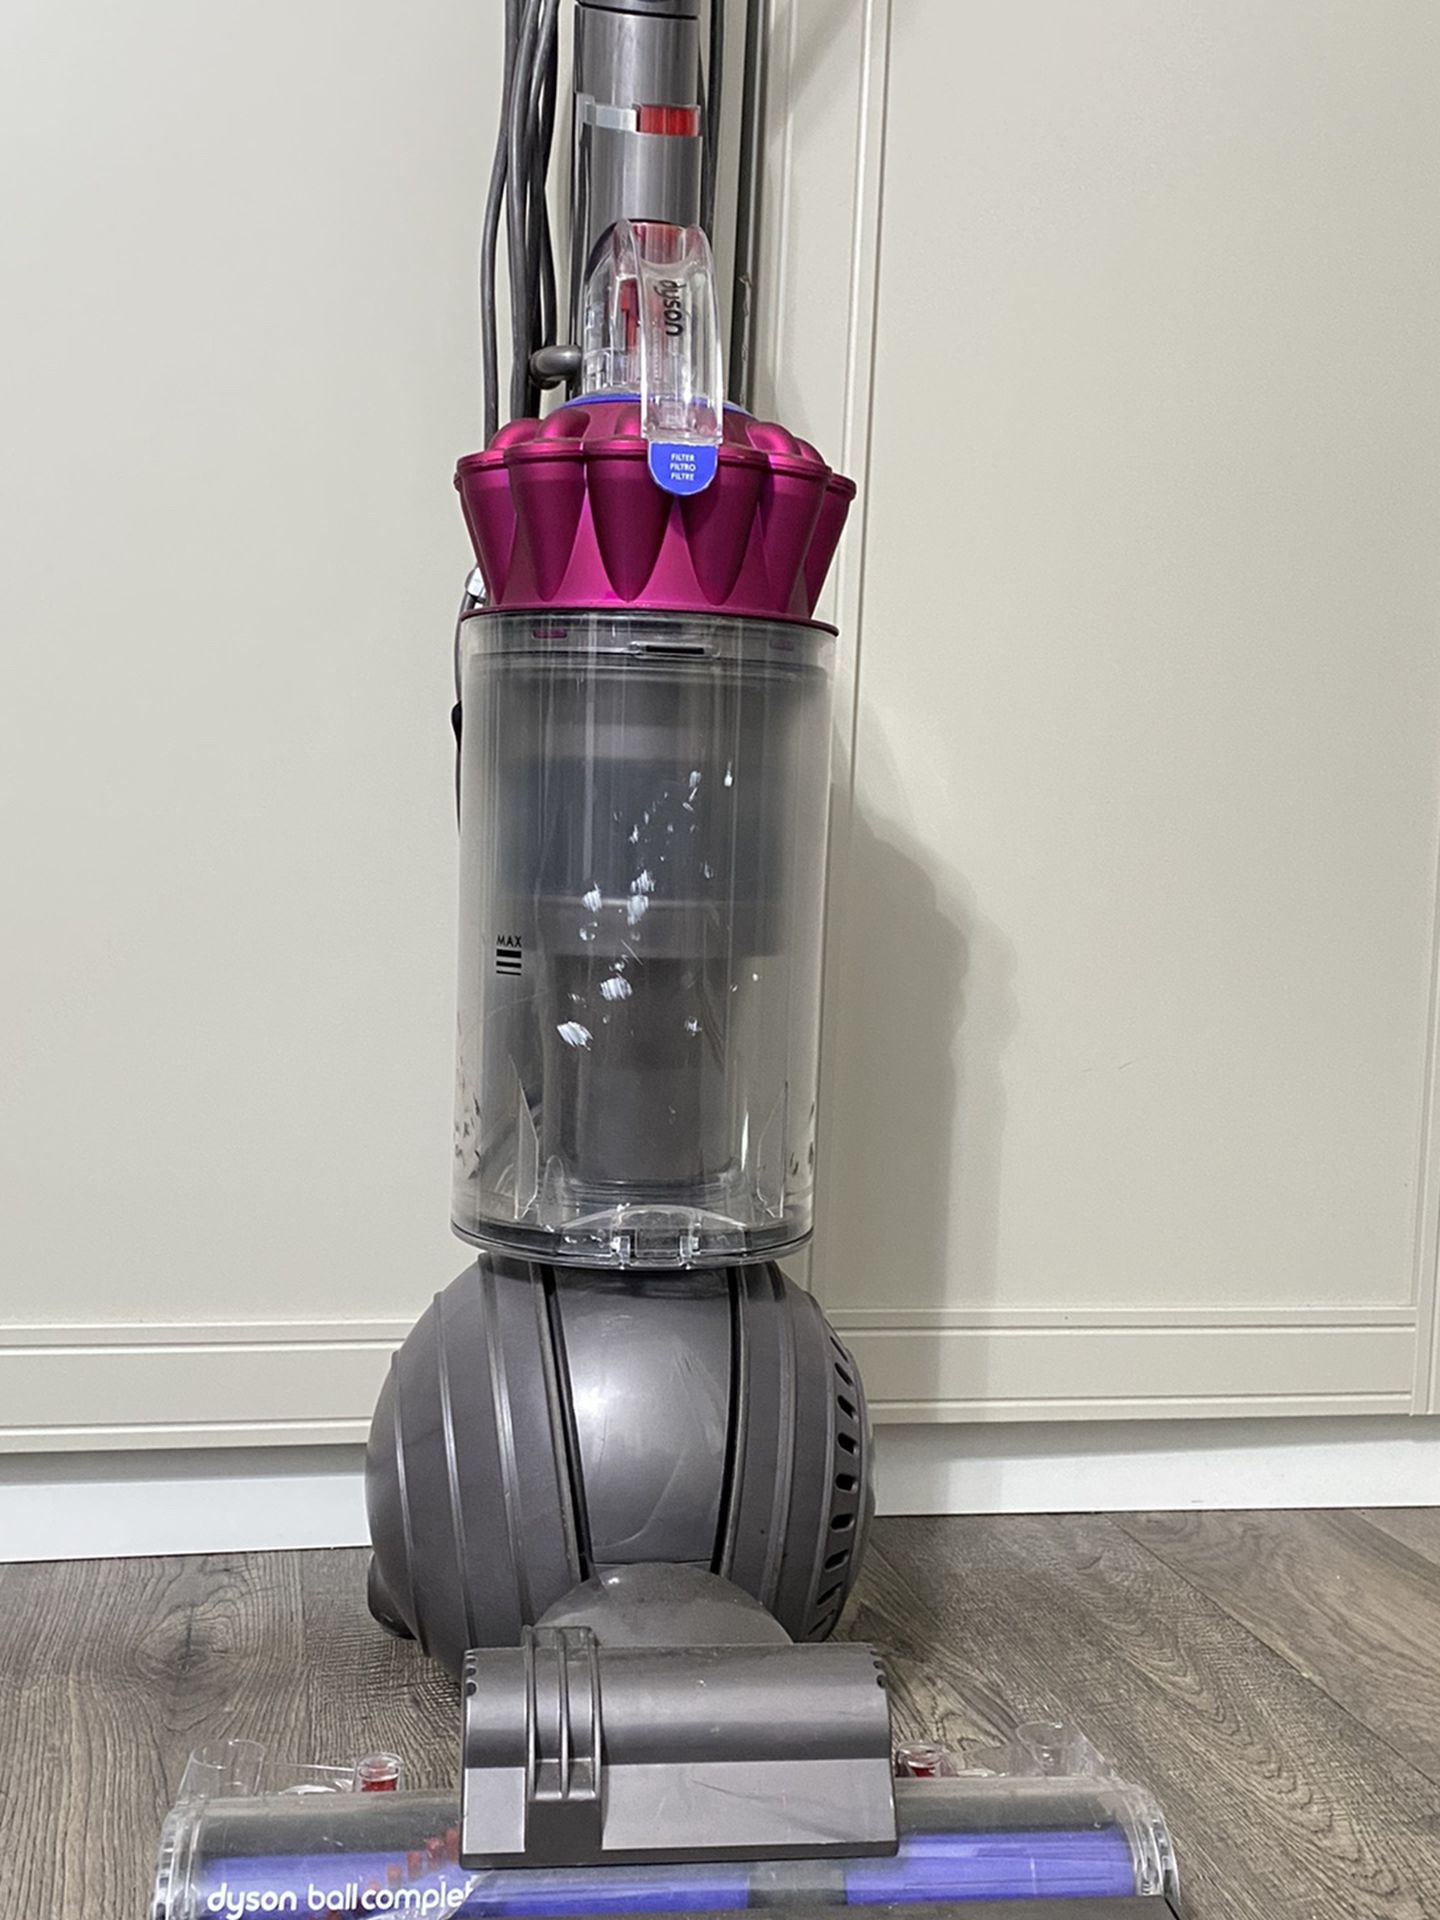 Dyson Ball Complete Upright vacuum